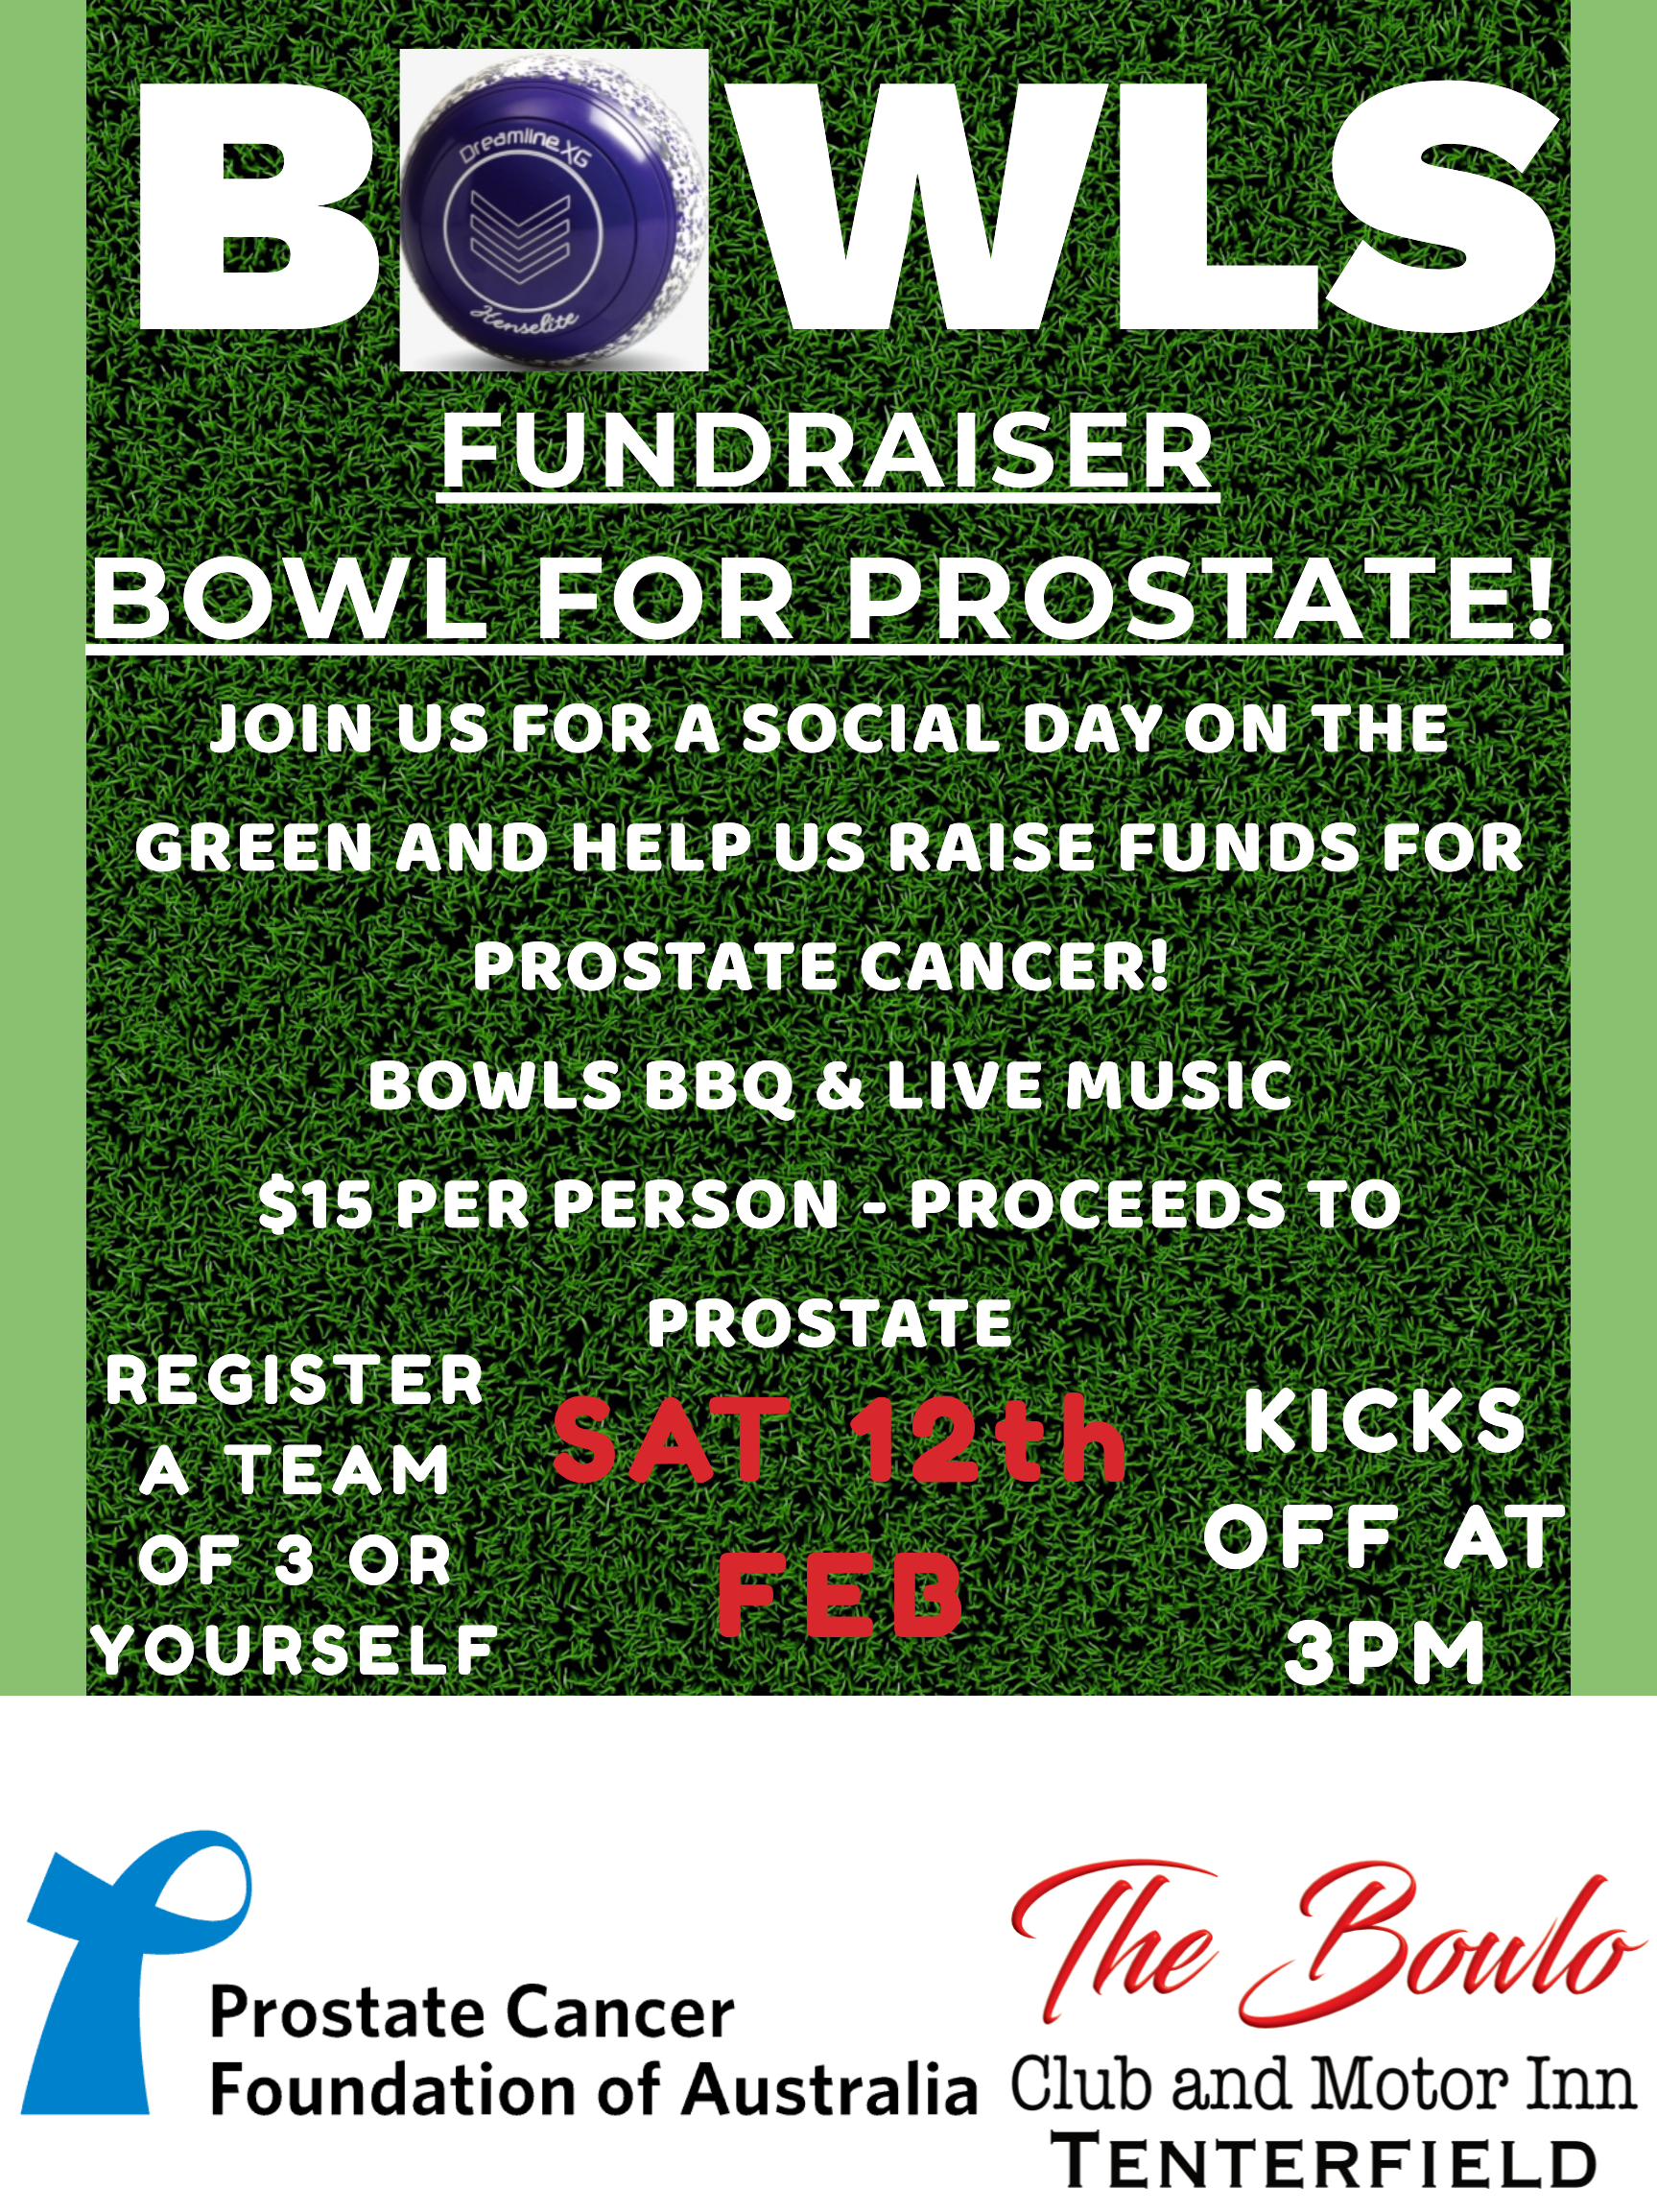 BOWL FOR PROSTATE FUN DAY